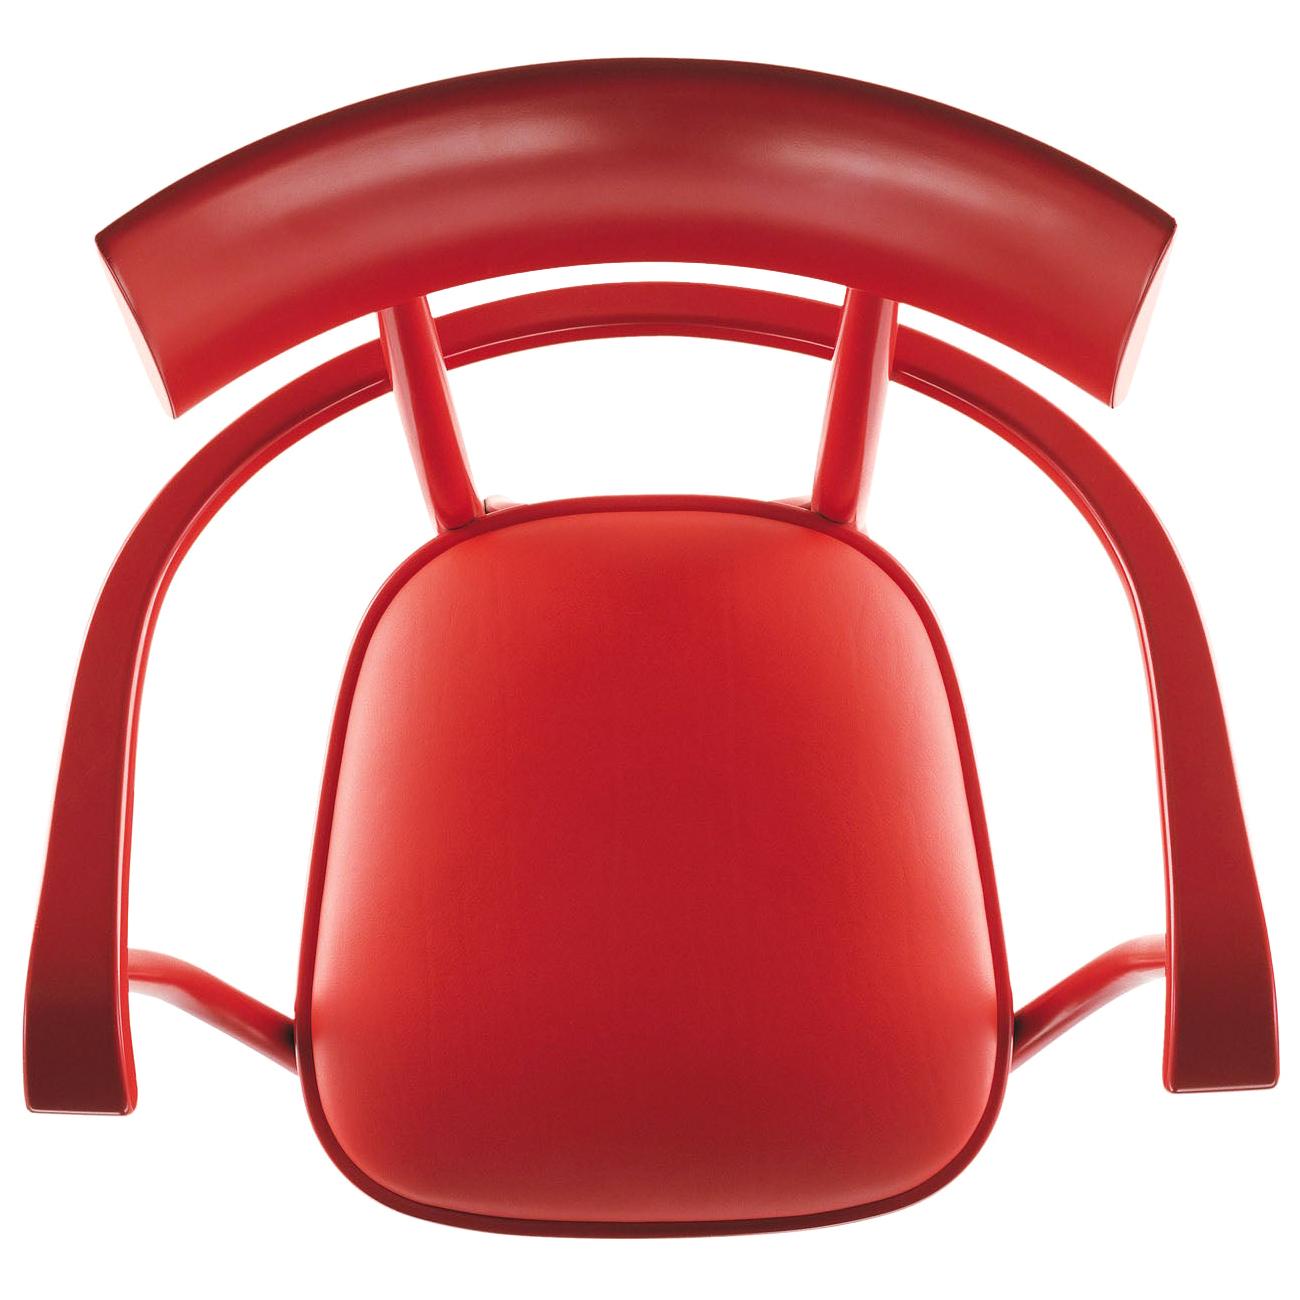 Gebrüder Thonet Vienna GmbH Czech Armchair in Flame Red with Upholstered Seat